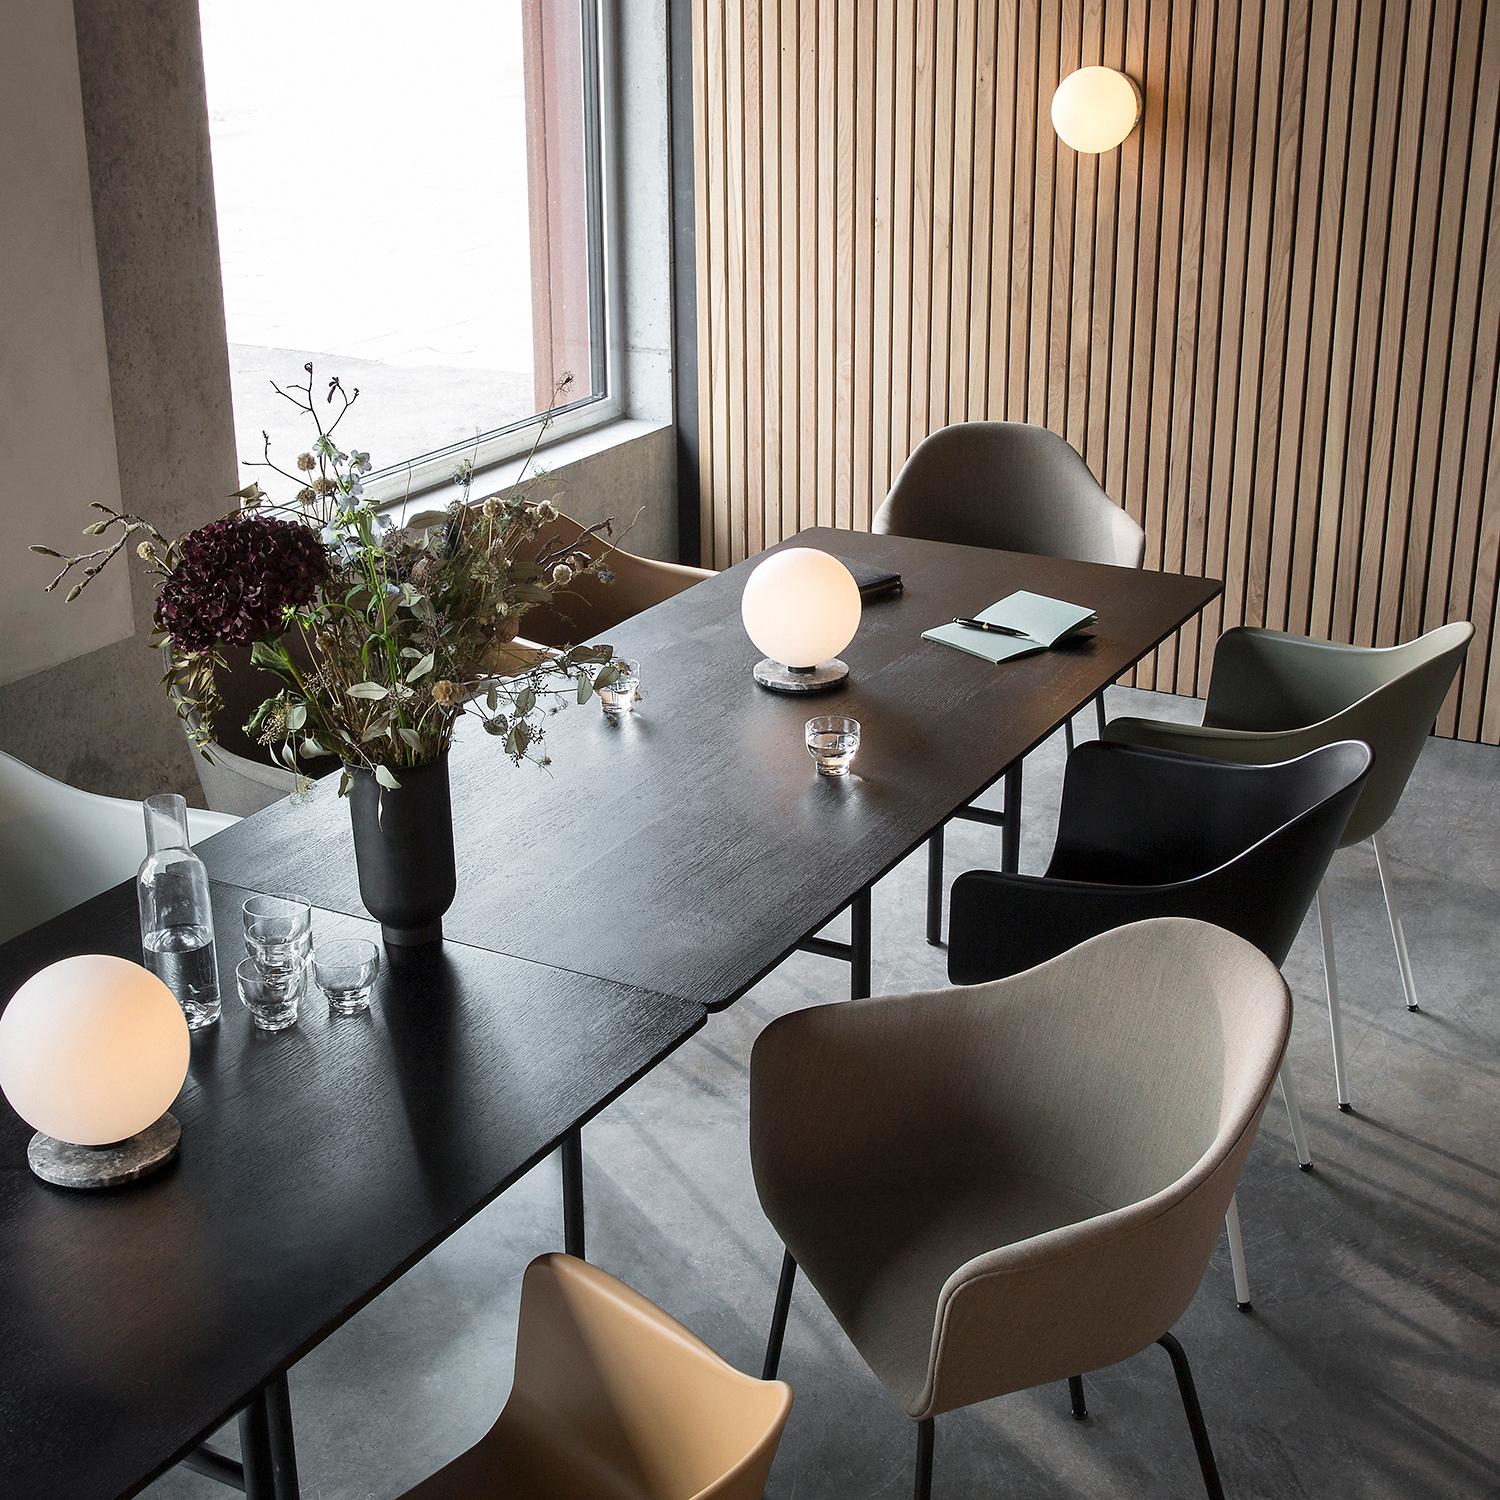 Conceived during the design process for Menu’s new creative destination Menu Space located in Copenhagen’s thriving Nordhavn (Northern Harbour) area, the Harbour Chair is the result of fulfilling a variety of needs (among others) comfortable